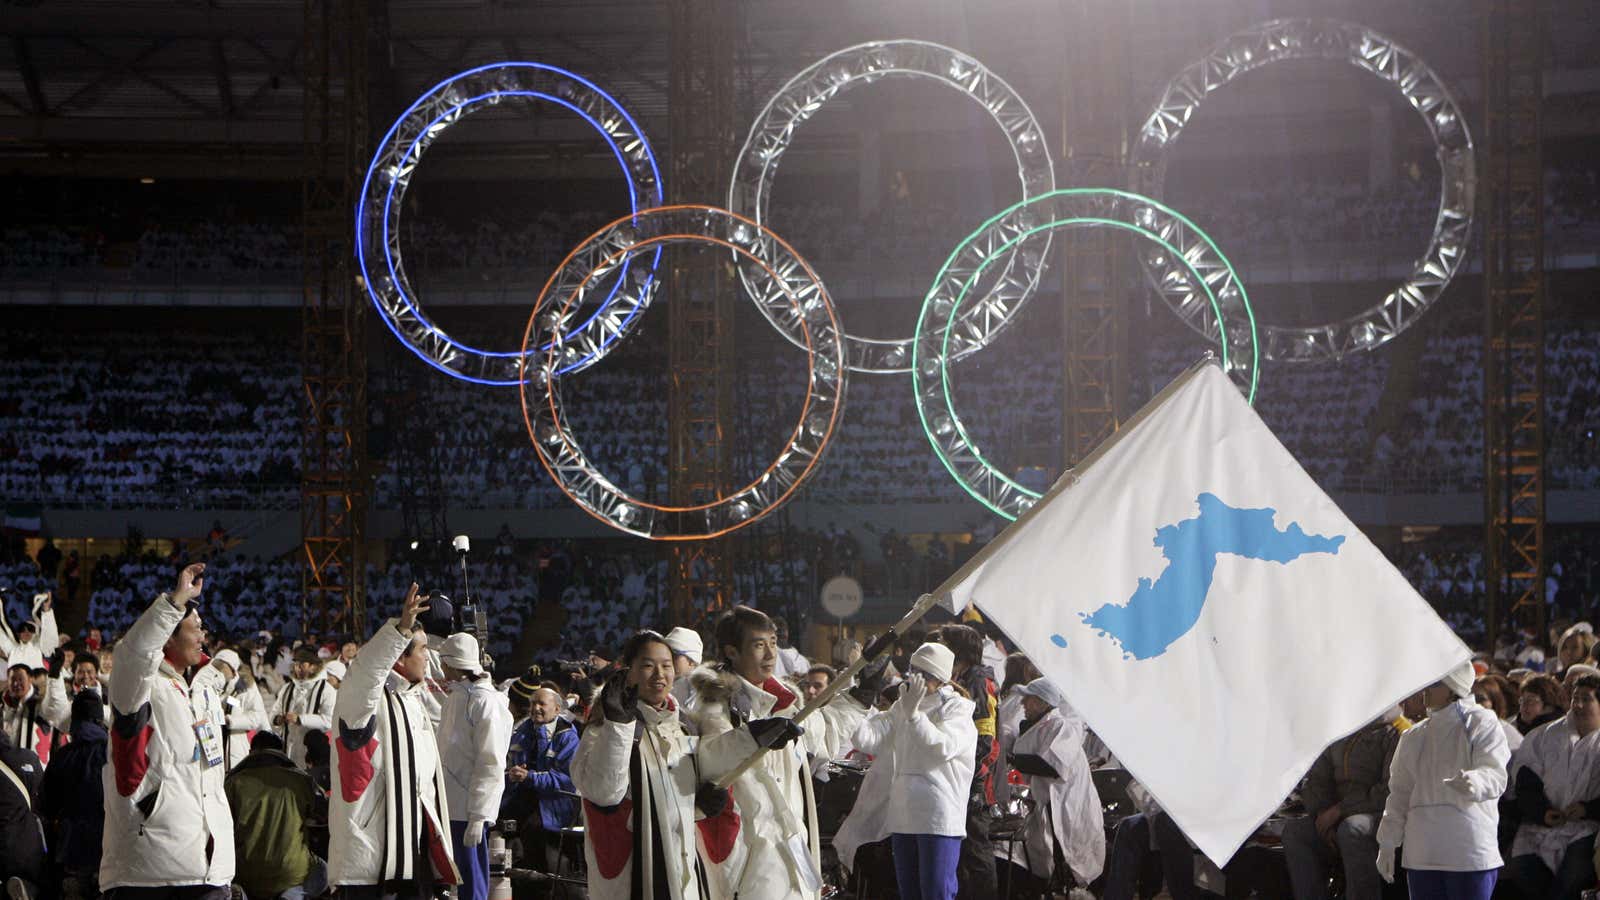 During the 2006 Winter Olympics opening ceremony in Turin, Italy, North and South Korea carried a “unification” flag.